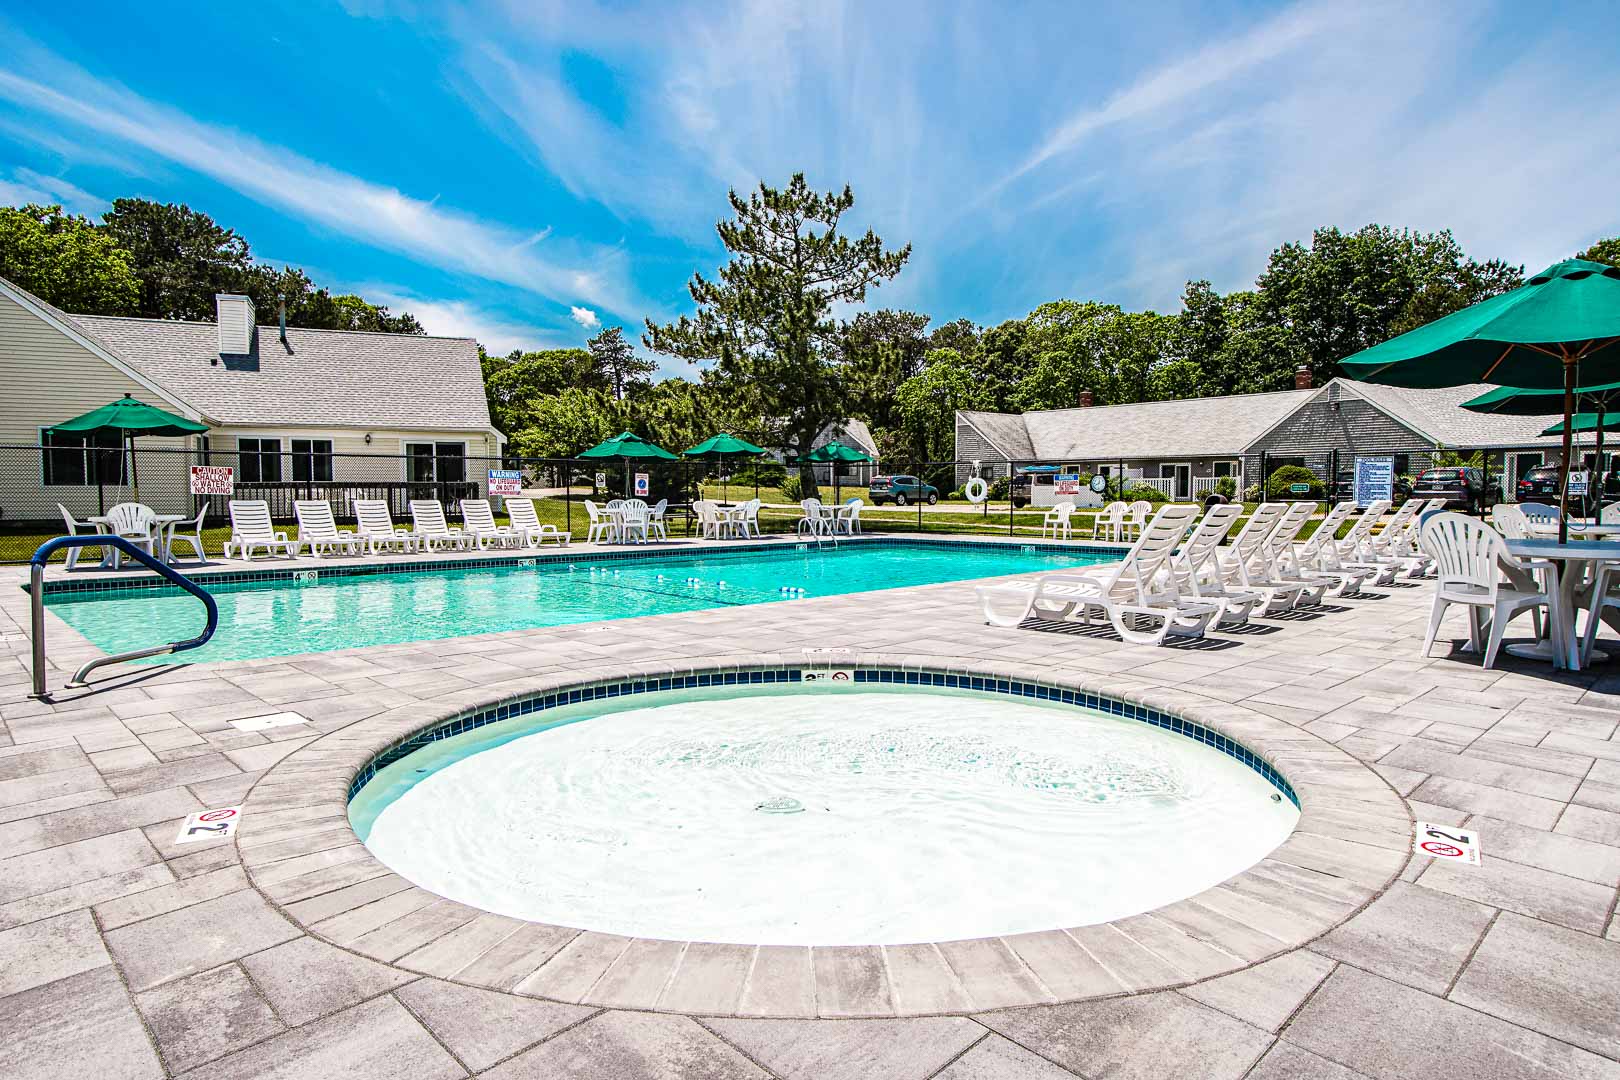 A serene view of the outside swimming pool and jacuzzi at VRI's Brewster Green Resort in Massachusetts.